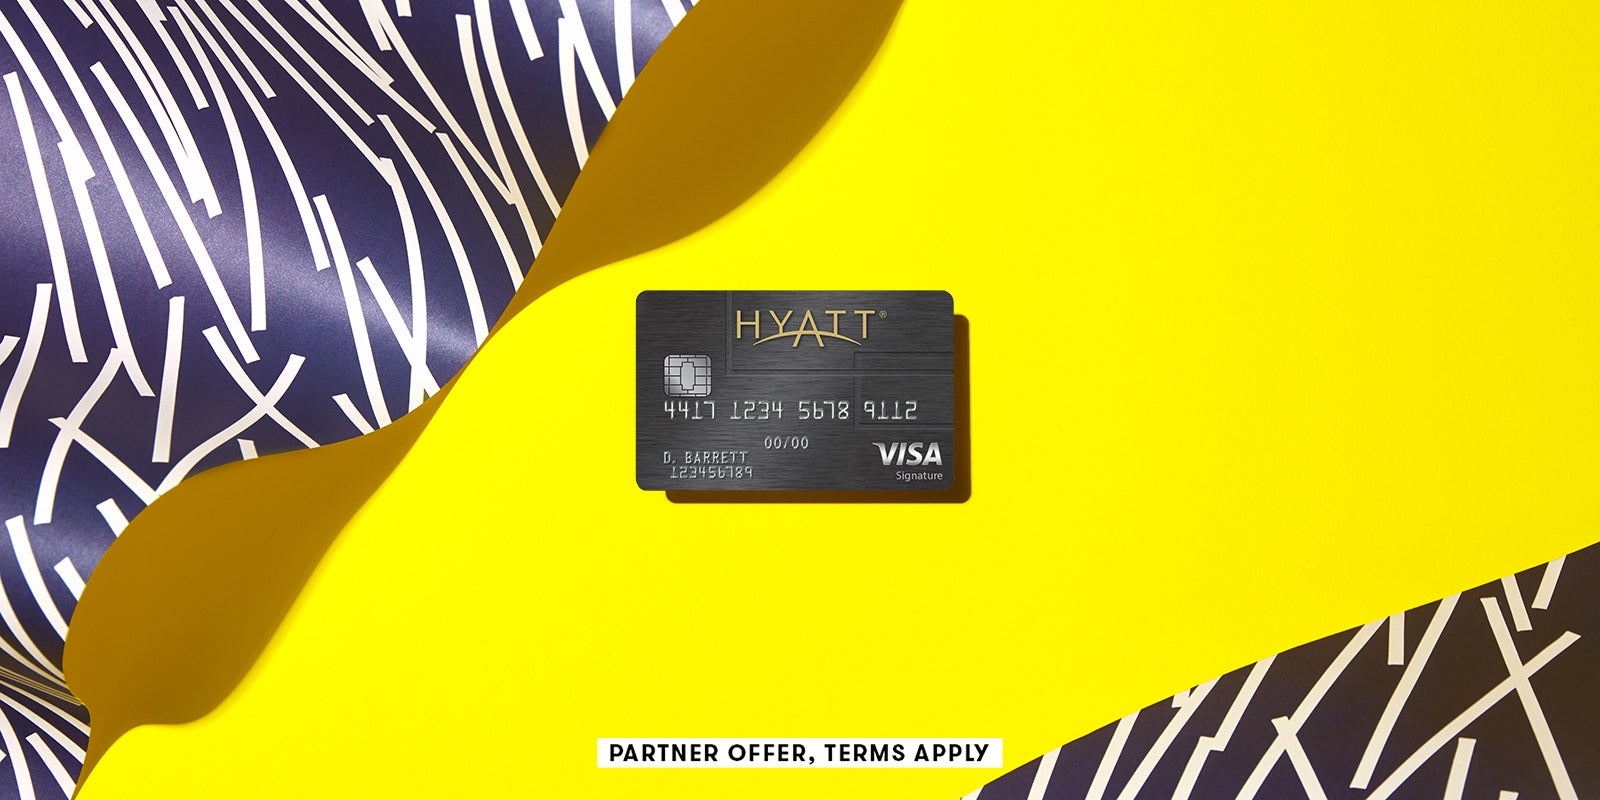 Hyatt is eliminating its legacy credit card -- here's what you need to know